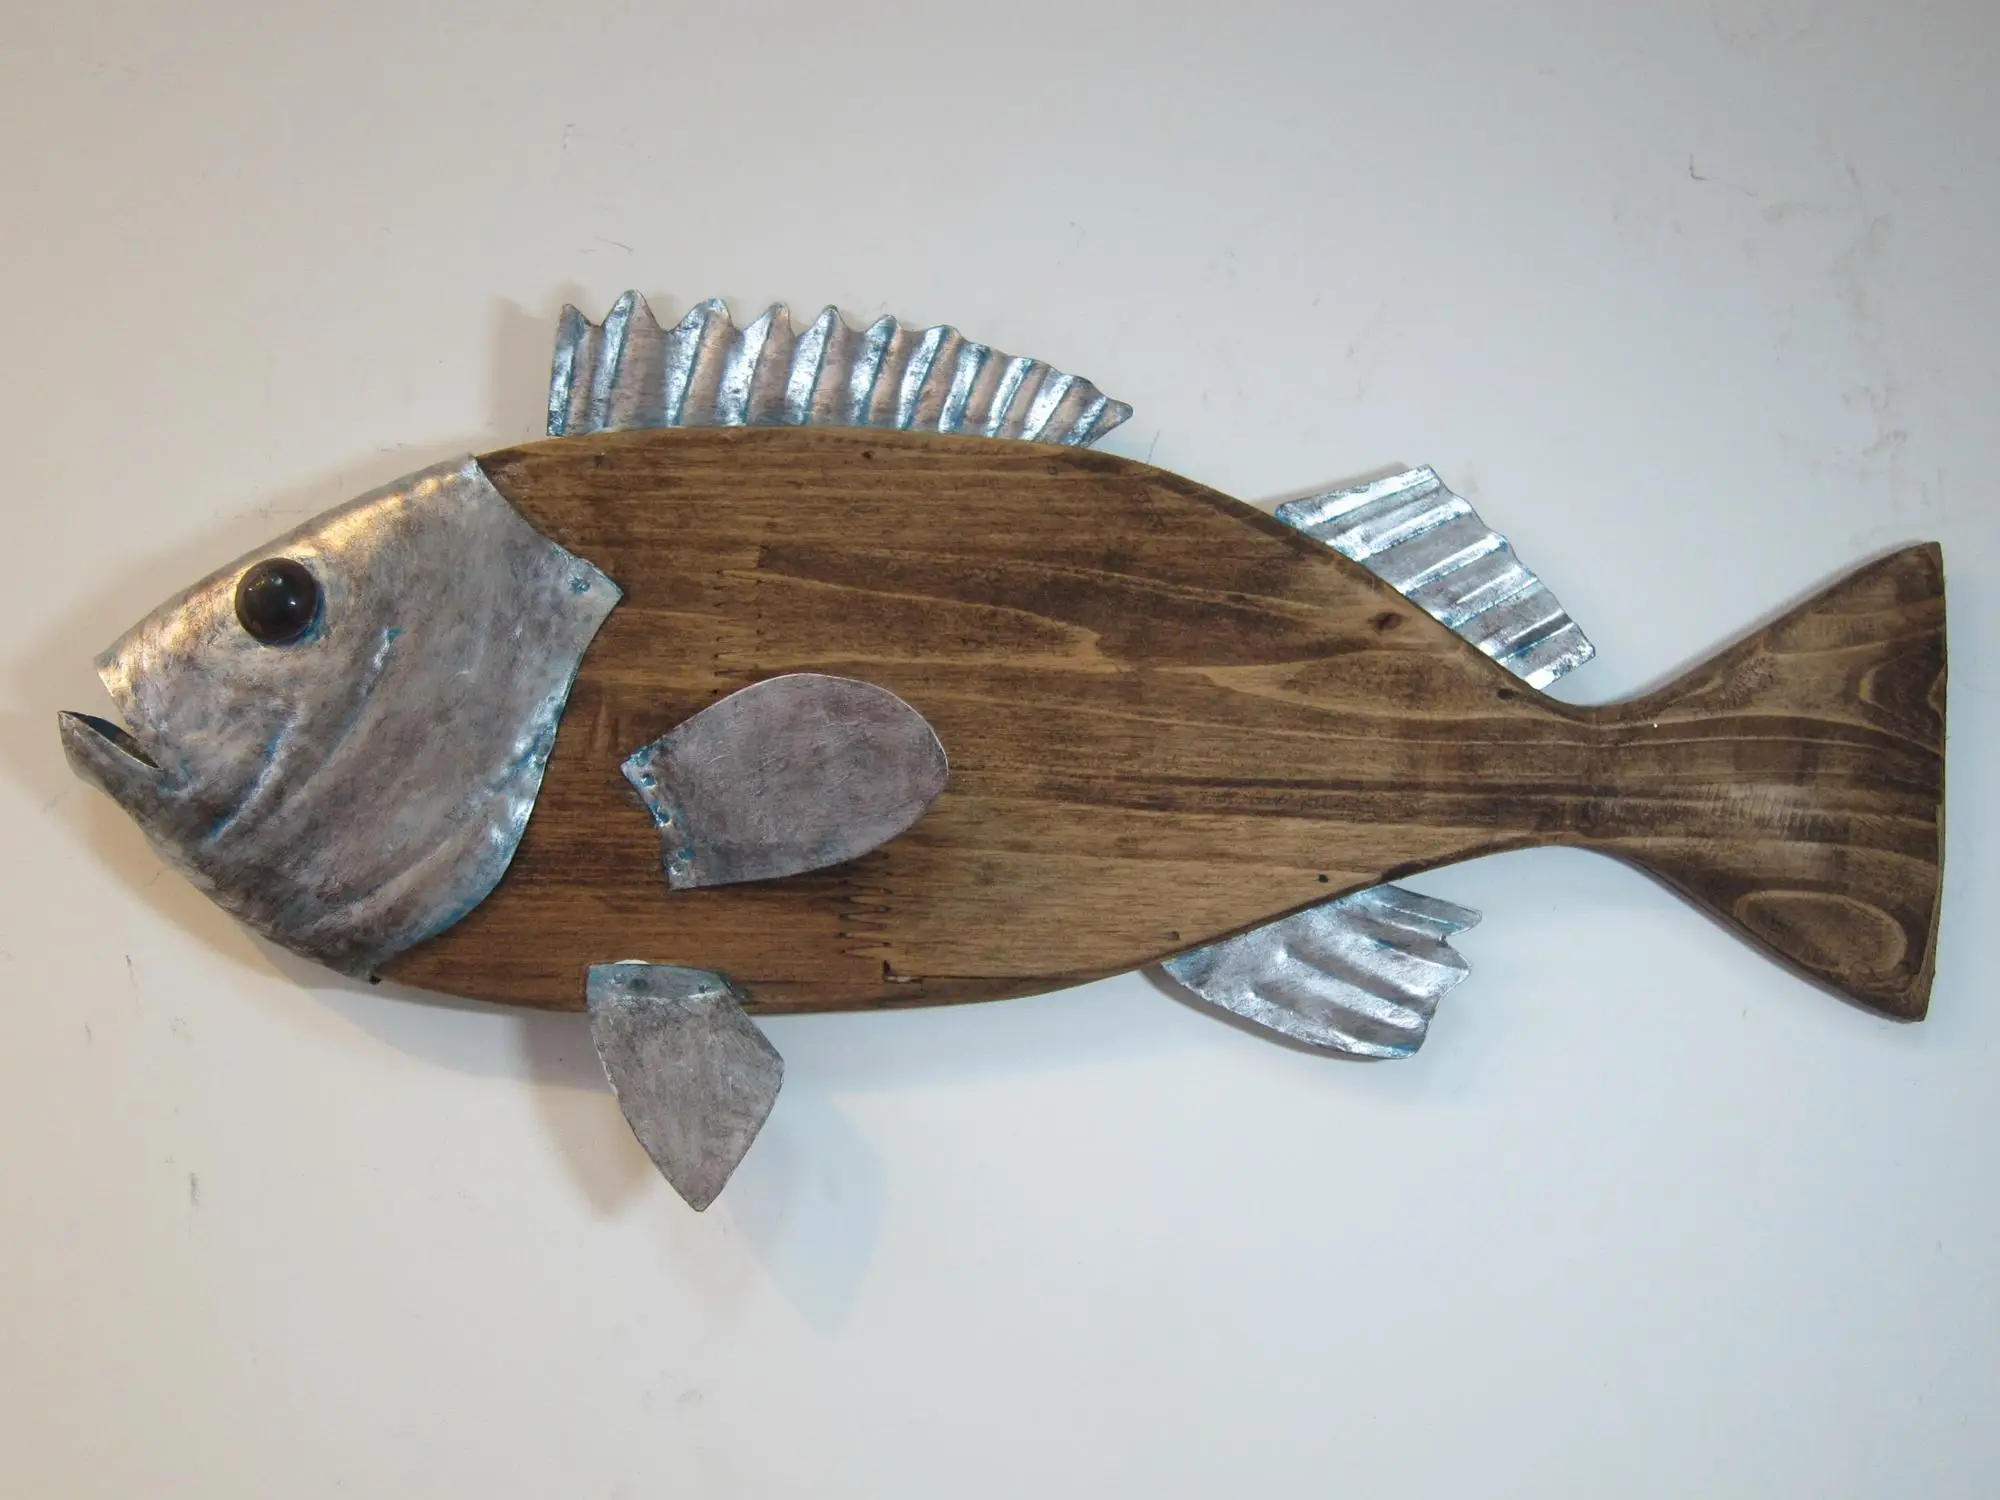 High quality custom house decoration wooden fish decoration metal furniture